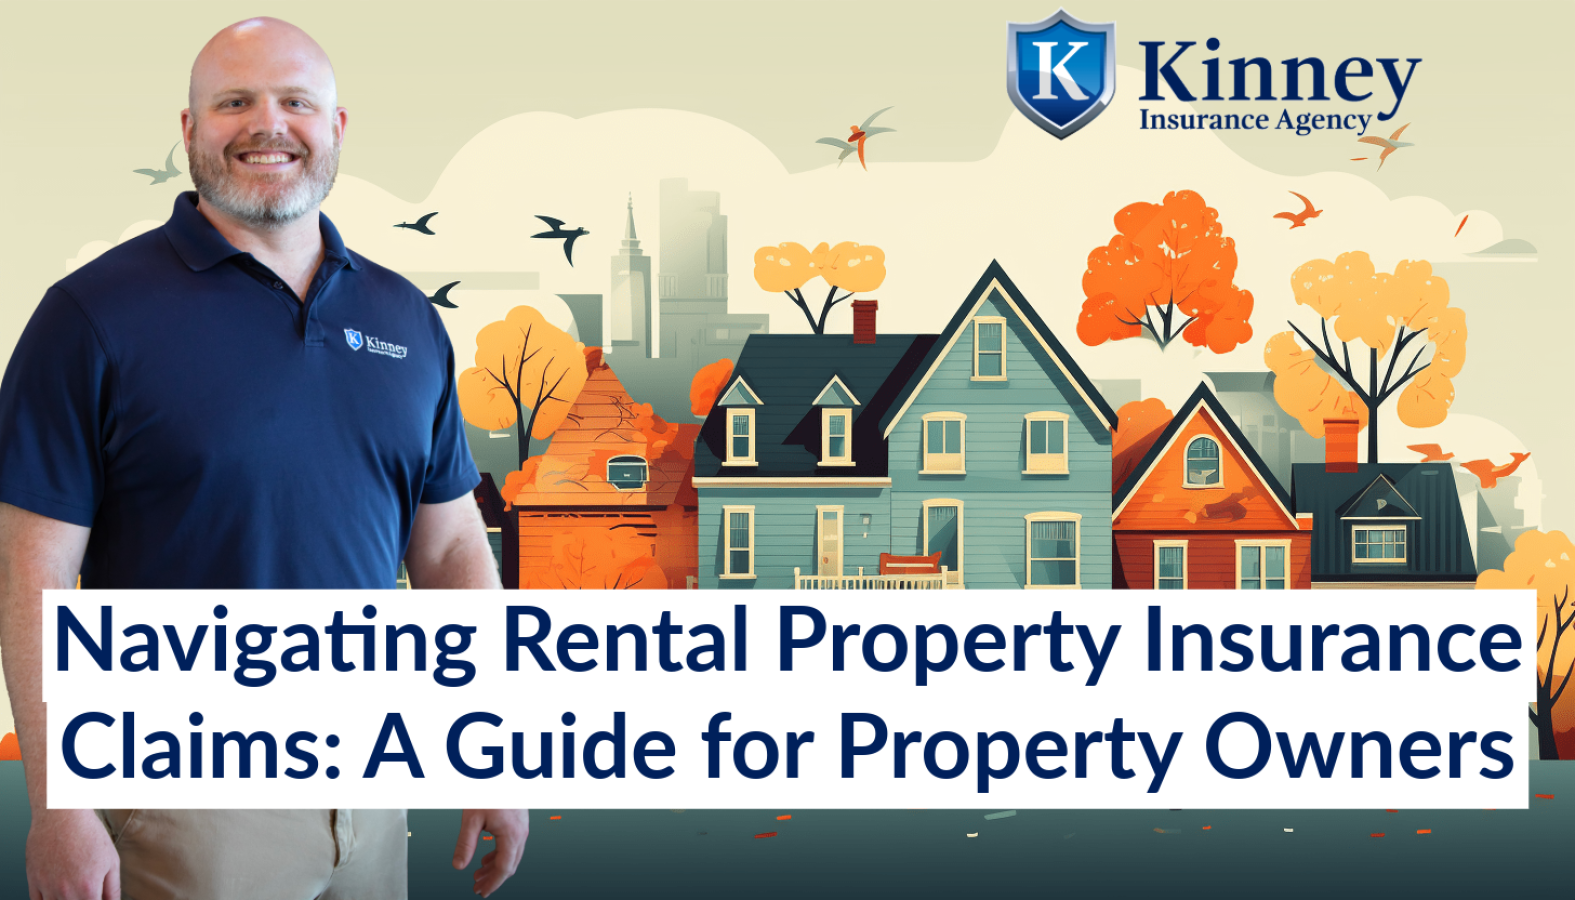 Navigating Rental Property Insurance Claims: A Guide for Property Owners